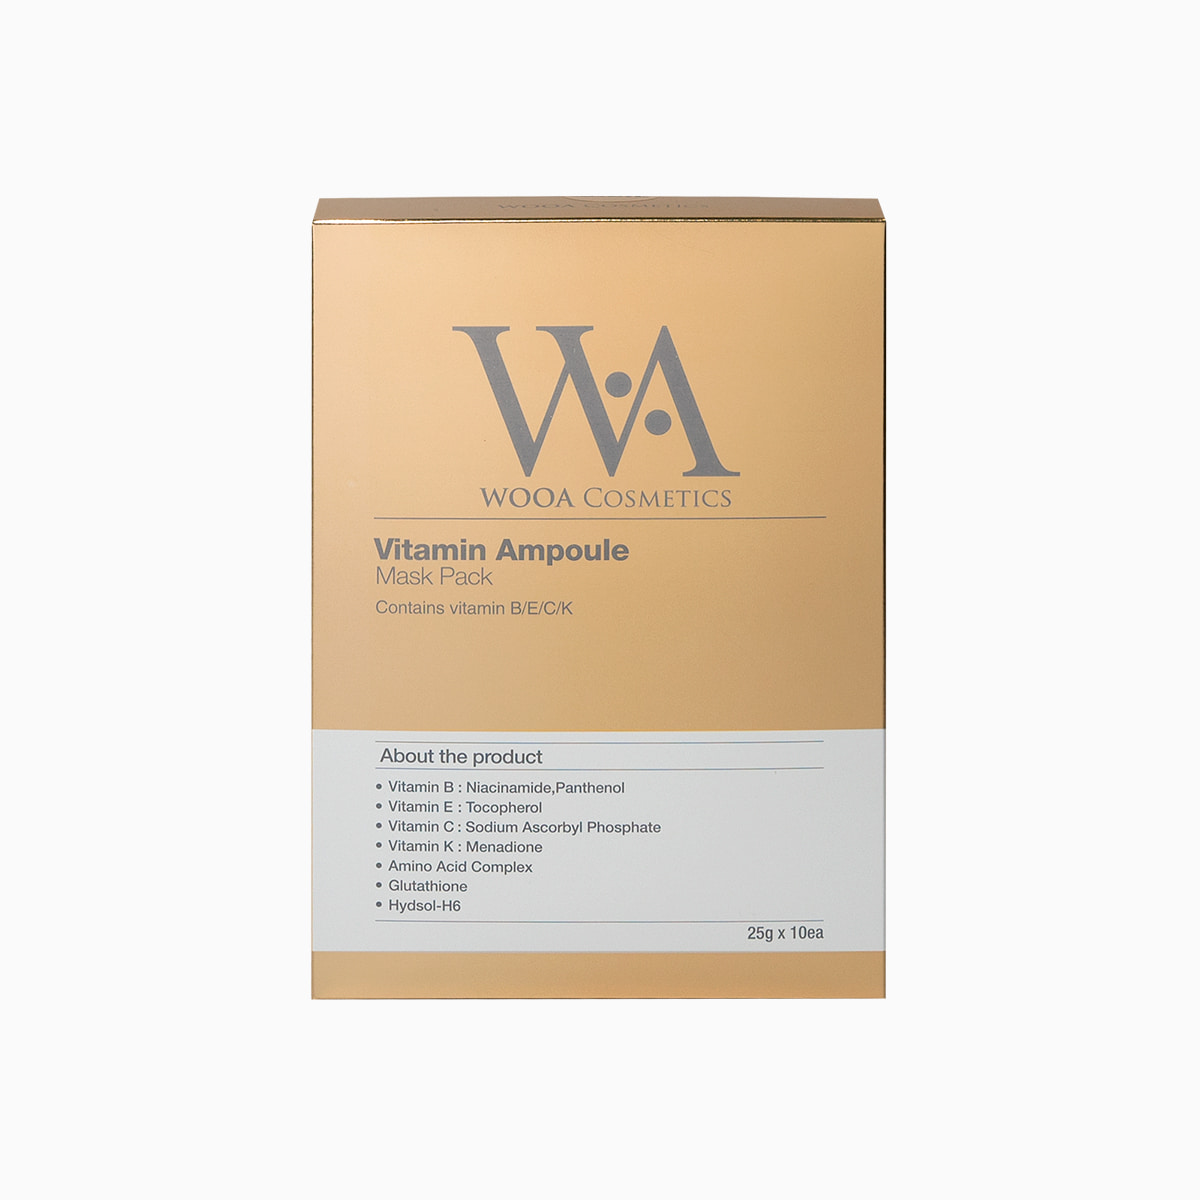 Vitamin Ampoule Mask Pack 25g x 10 1box